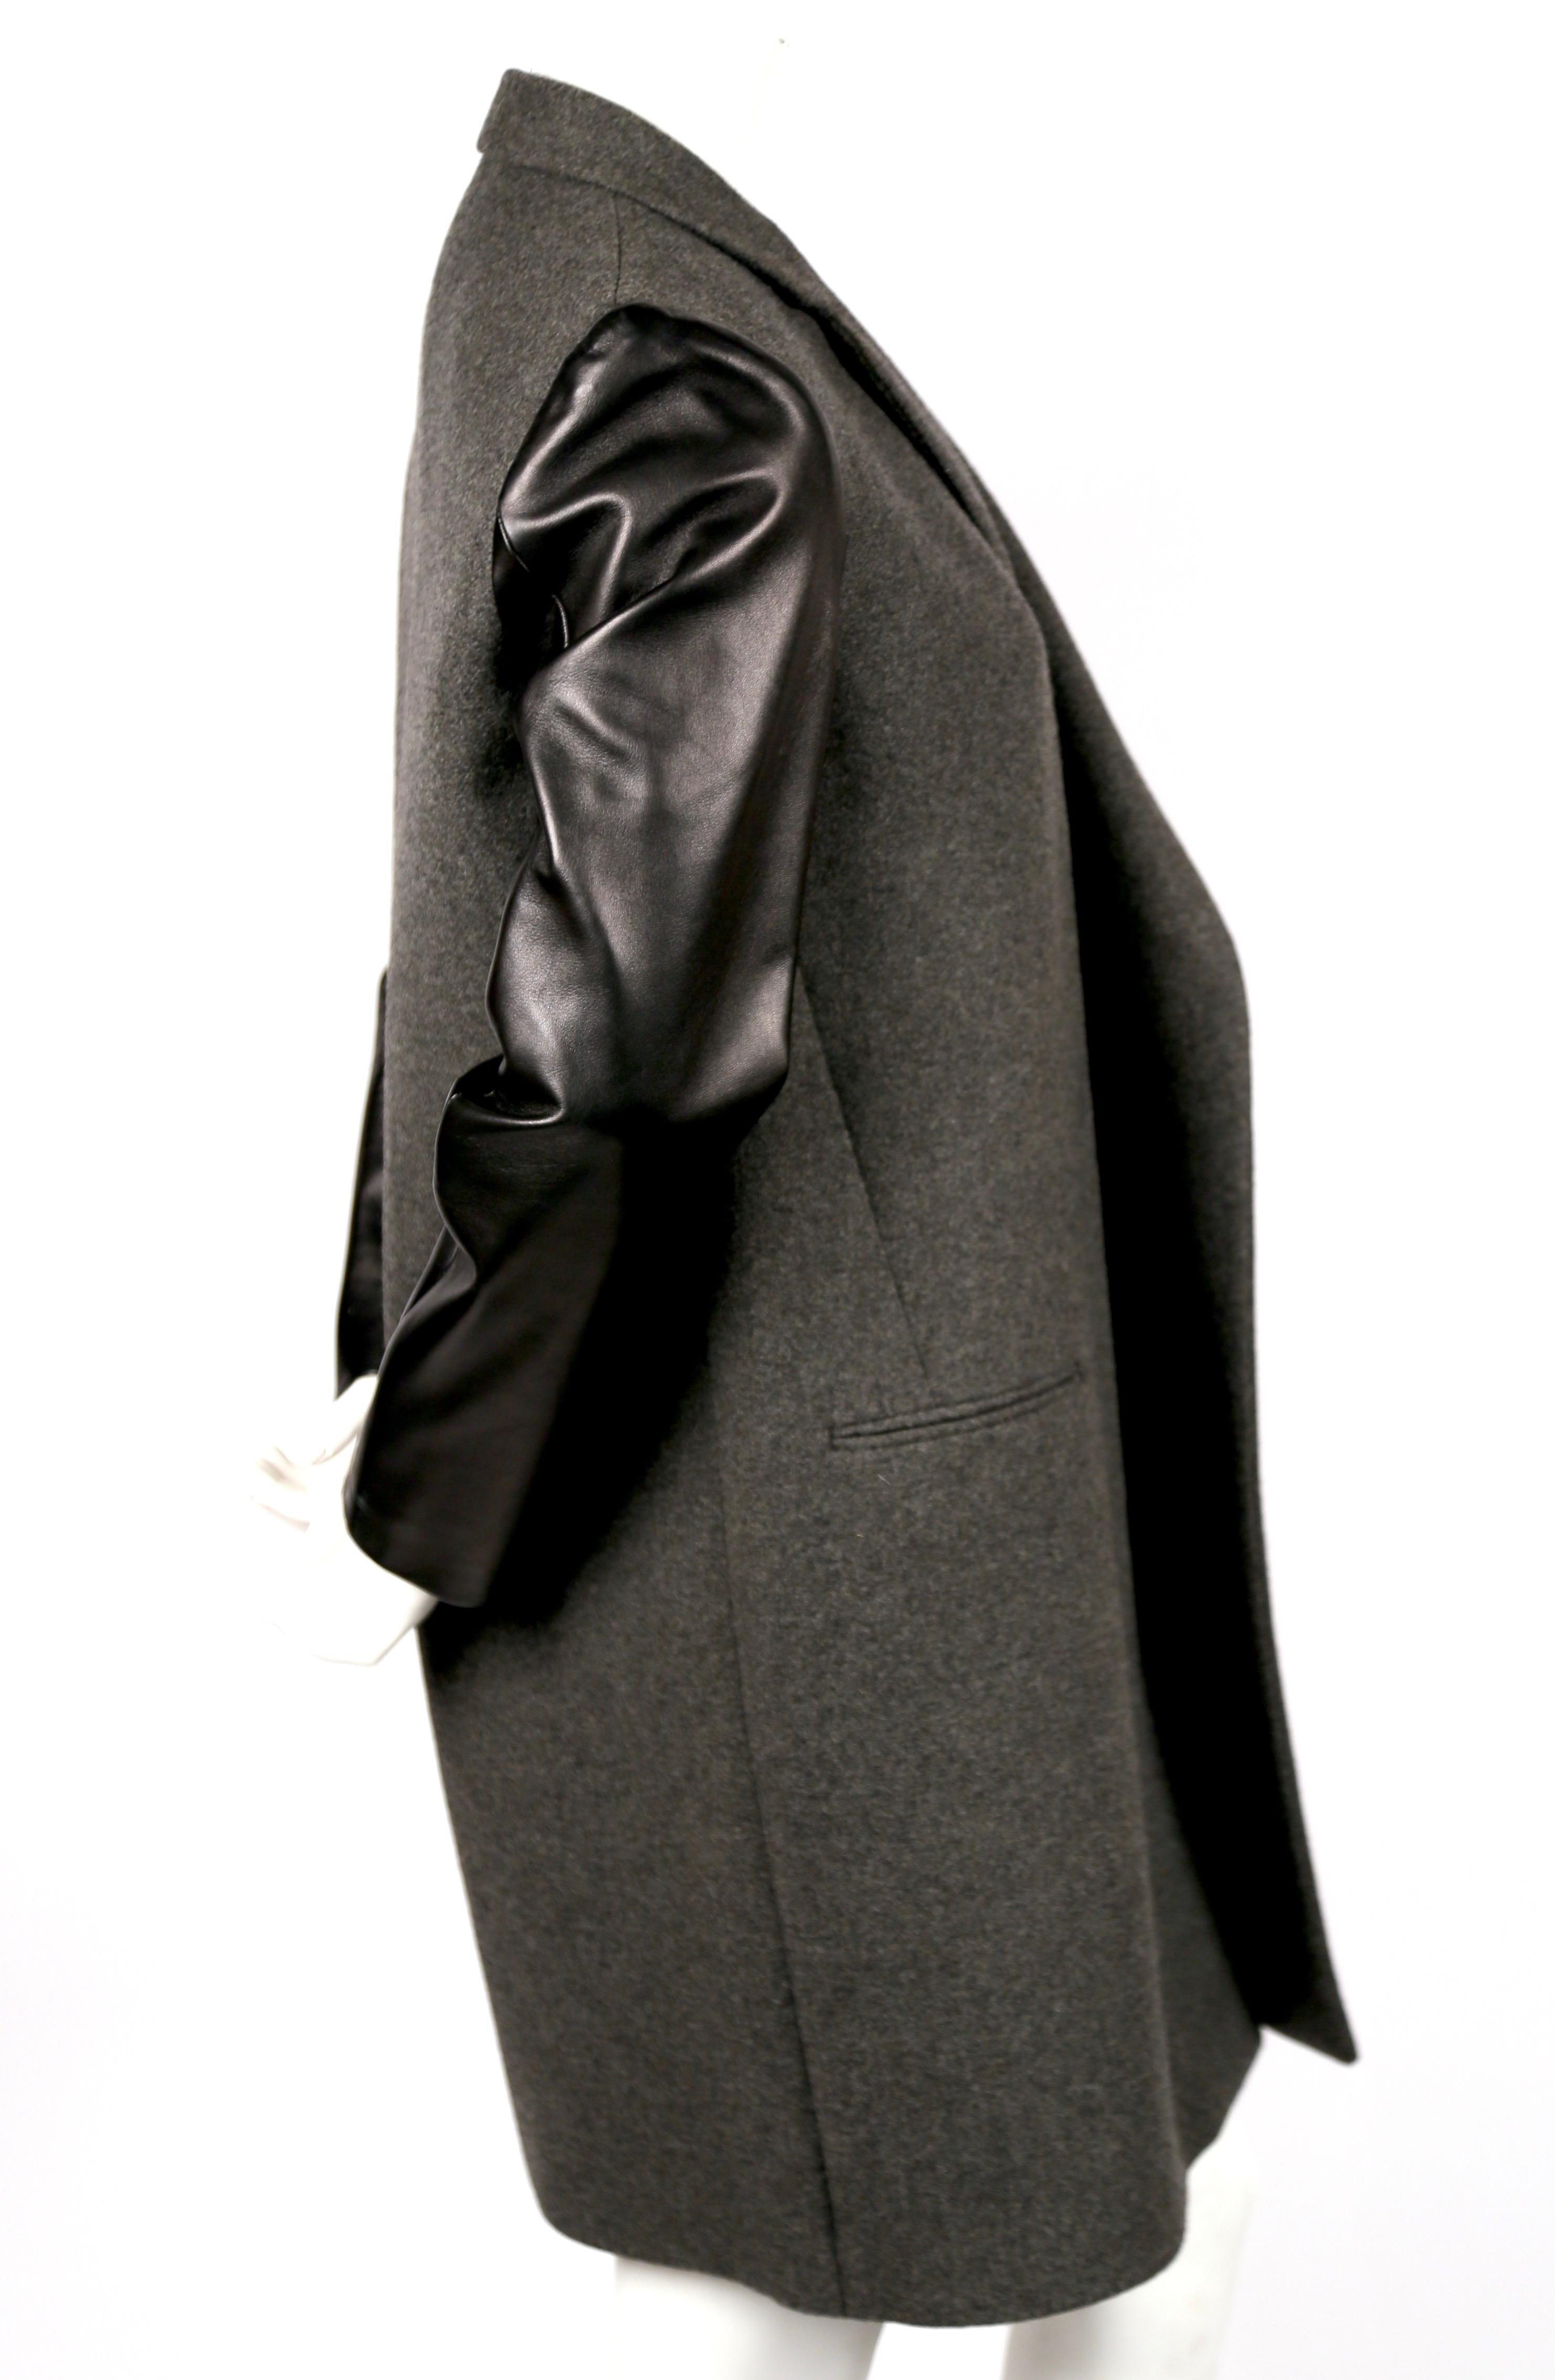 Charcoal grey crombie coat with black lambskin leather sleeves designed by Phoebe Philo for Celine. Labeled a French size 40 which best fits a size S or M. Approximate measurements: shoulder 15.5